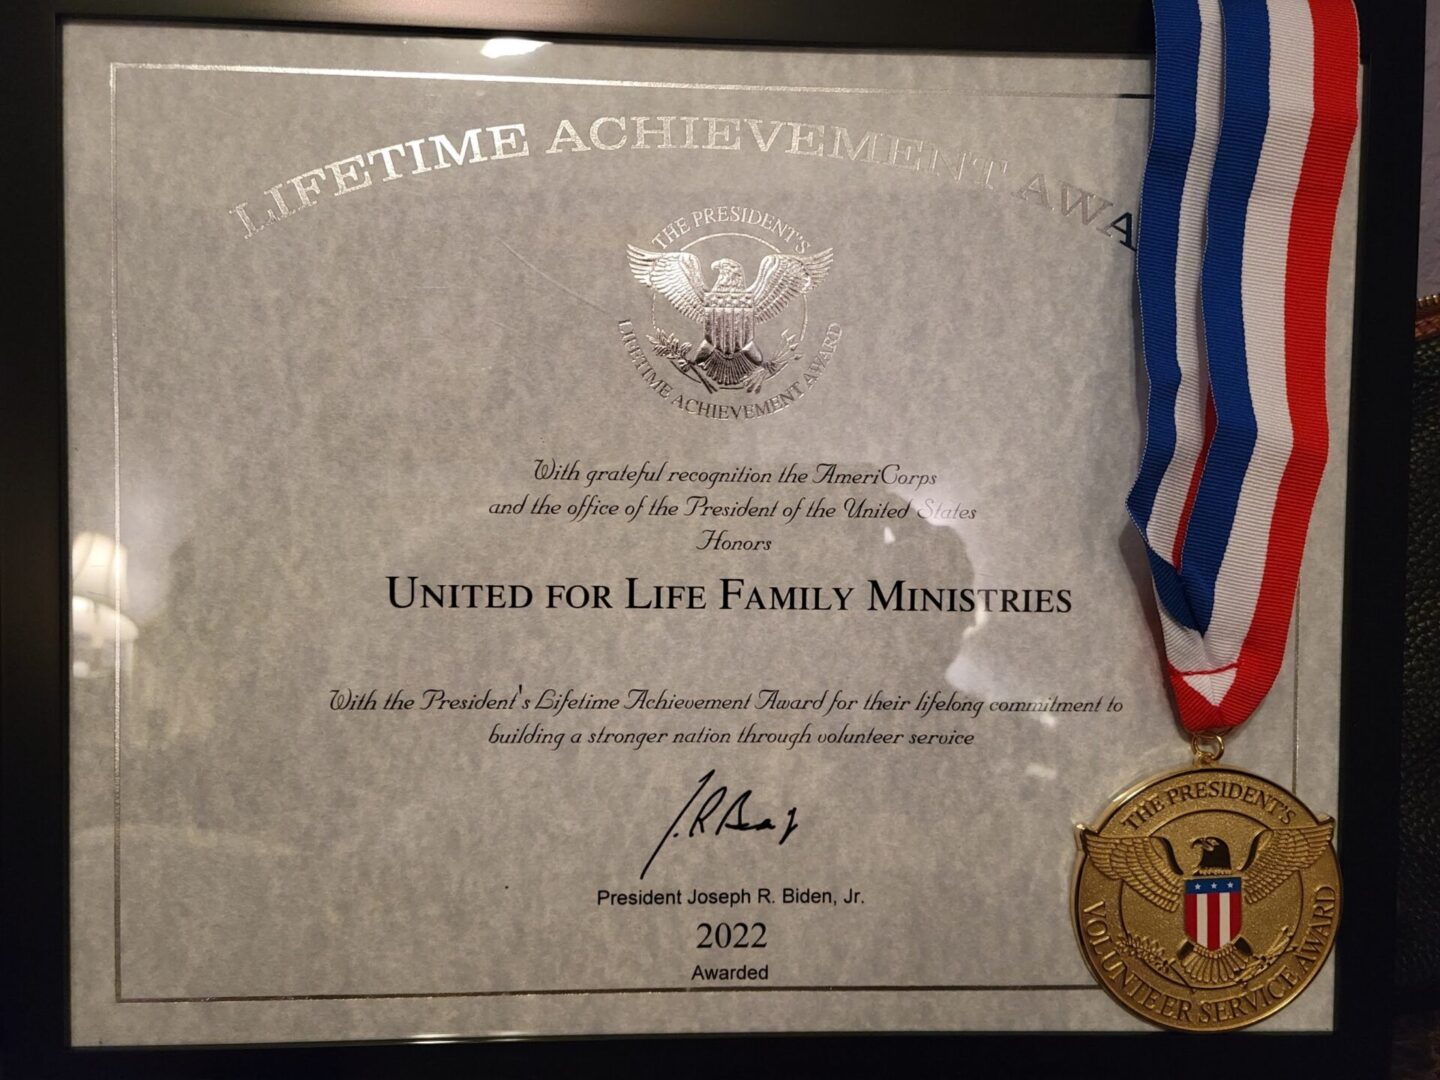 A medal and certificate are displayed in front of the united for life family ministries sign.